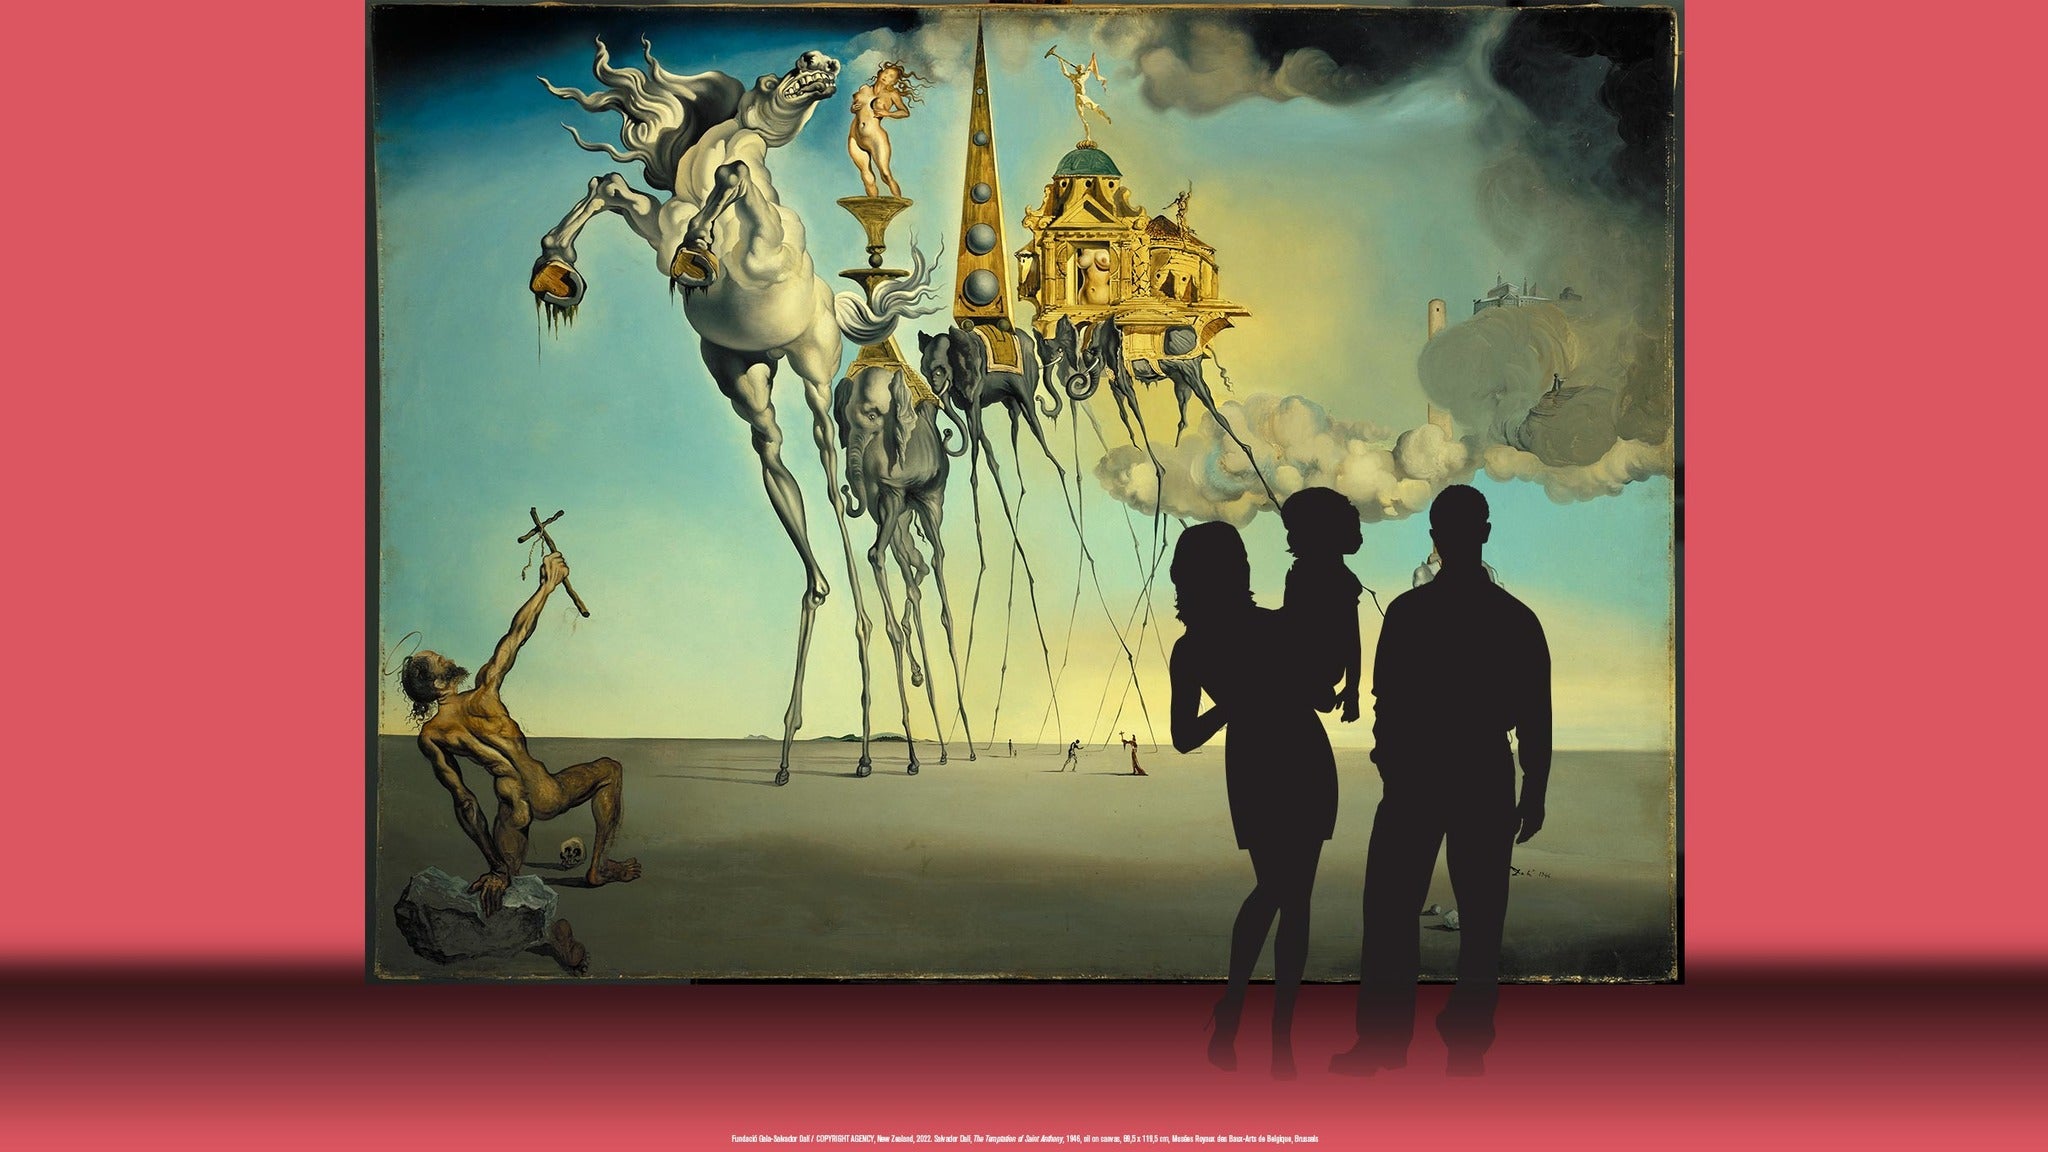 Image used with permission from Ticketmaster | Inside Dali tickets